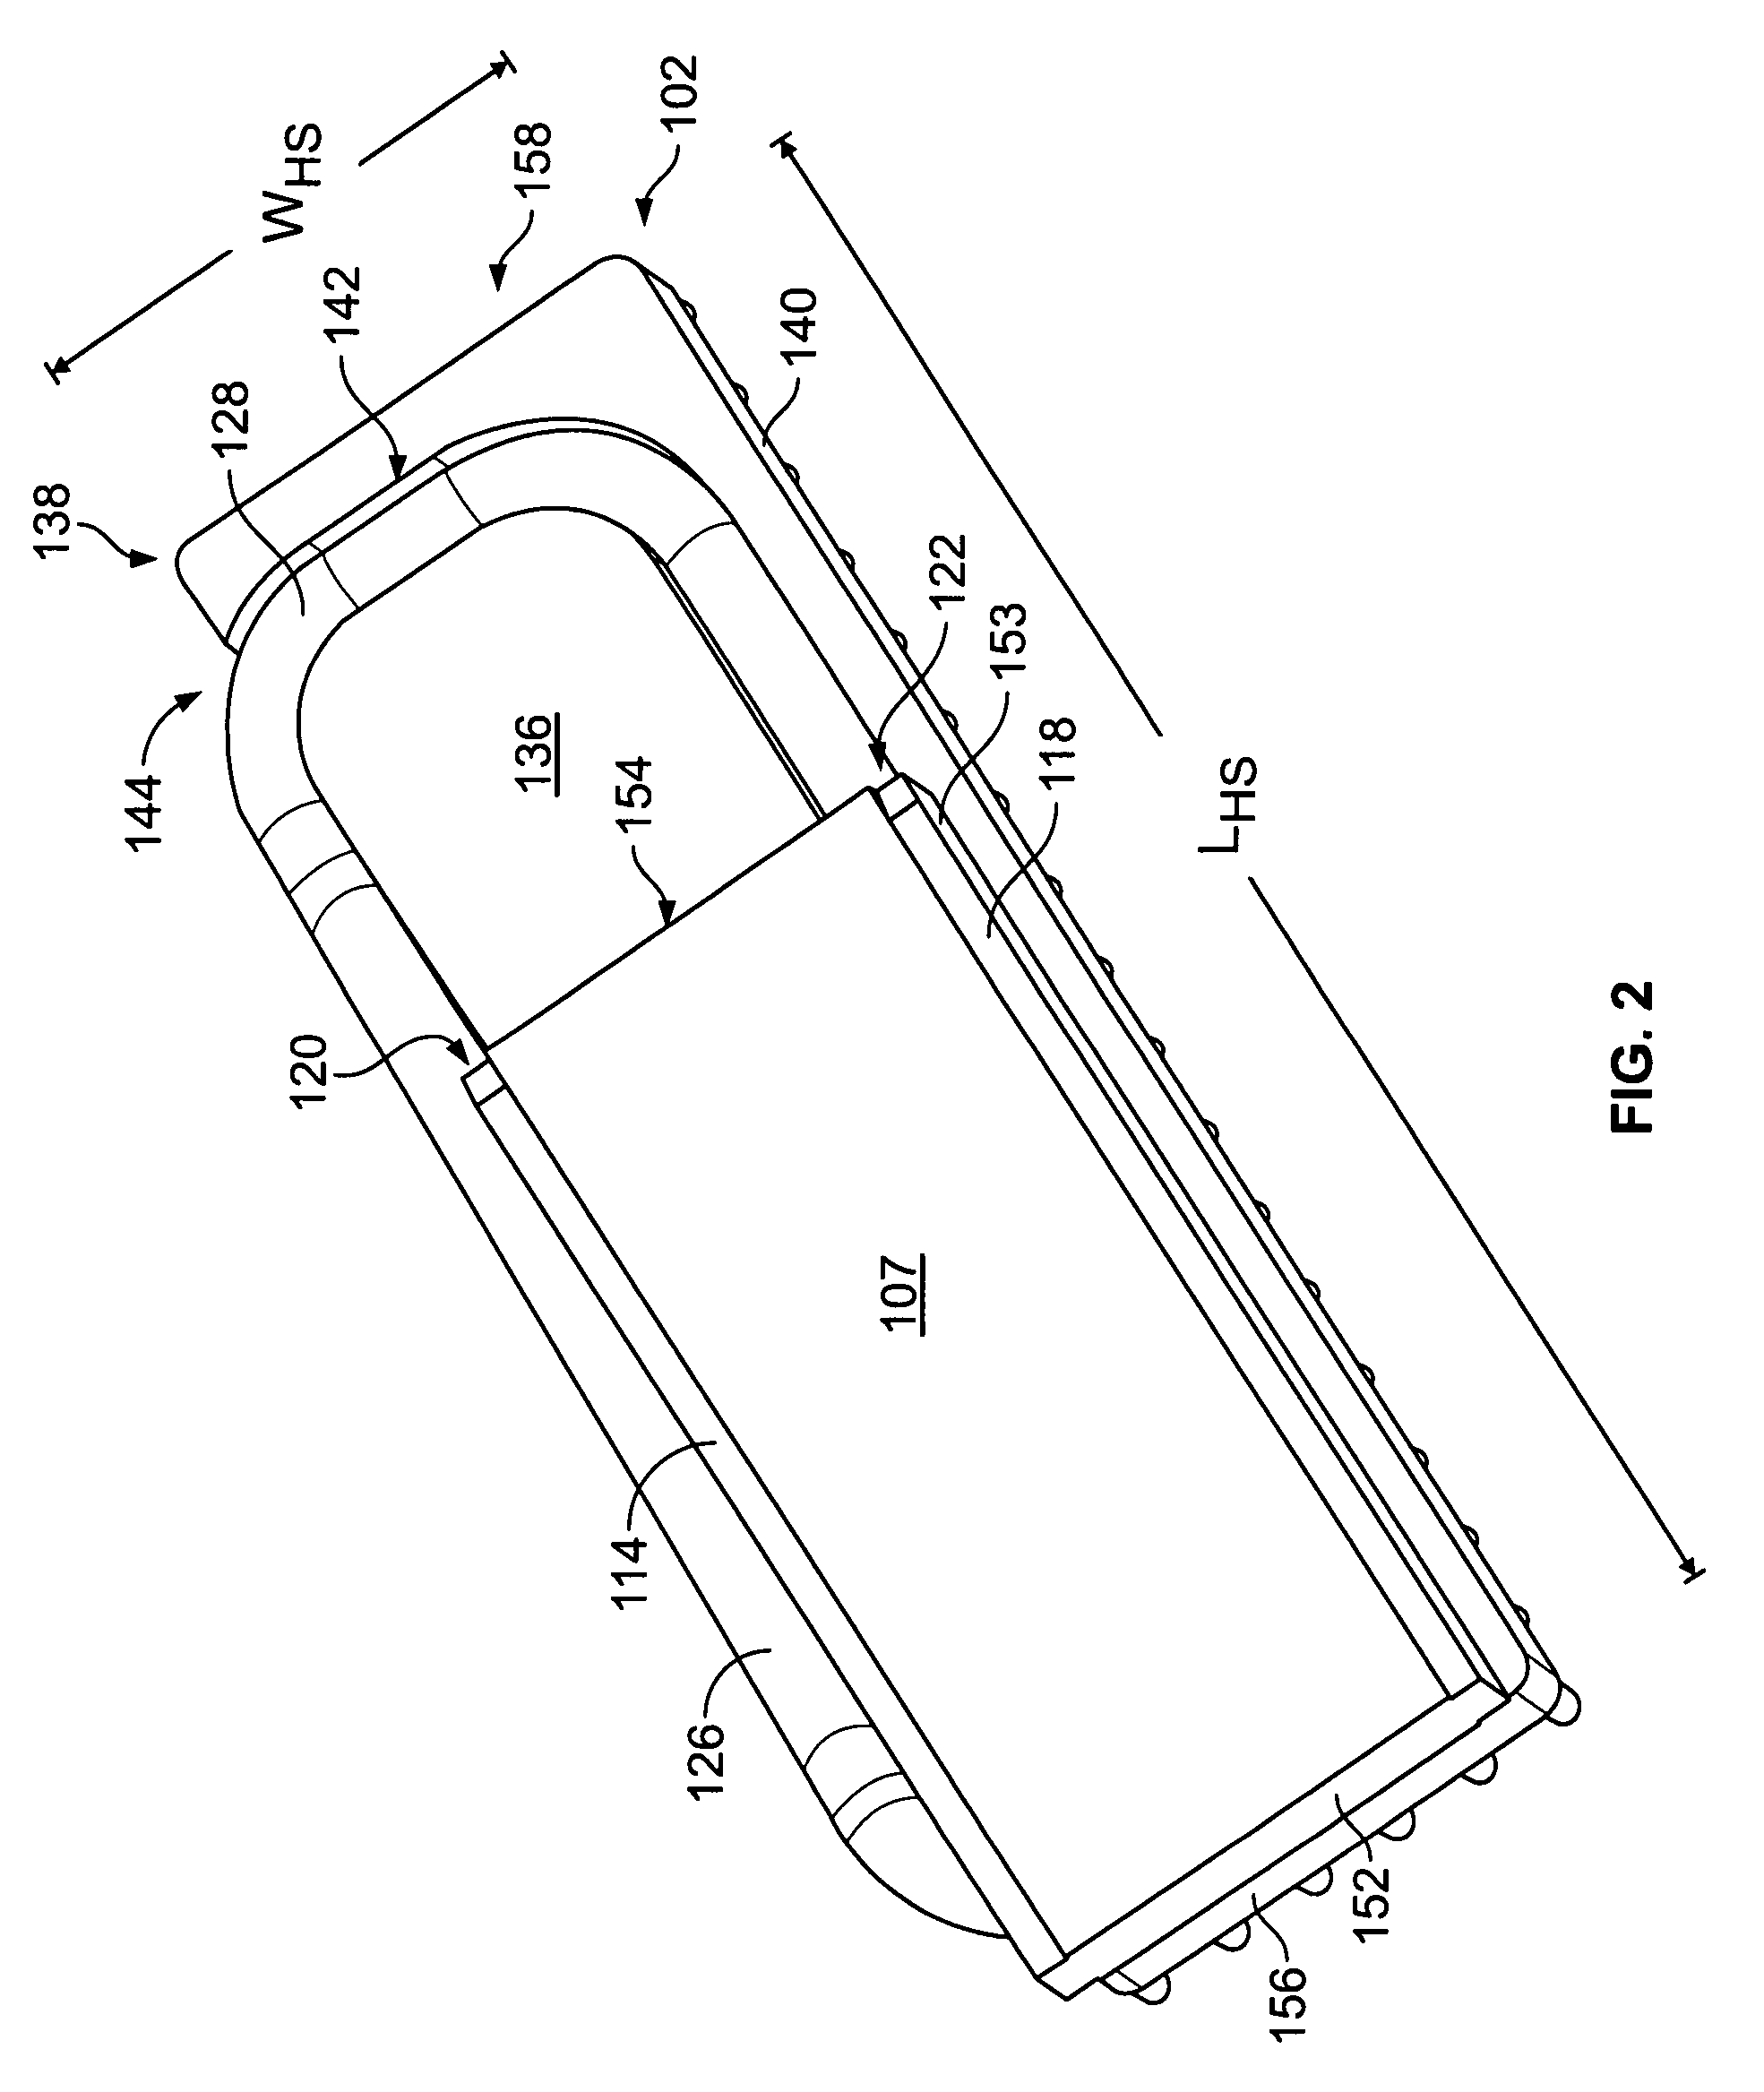 Heat transfer system for a receptacle assembly